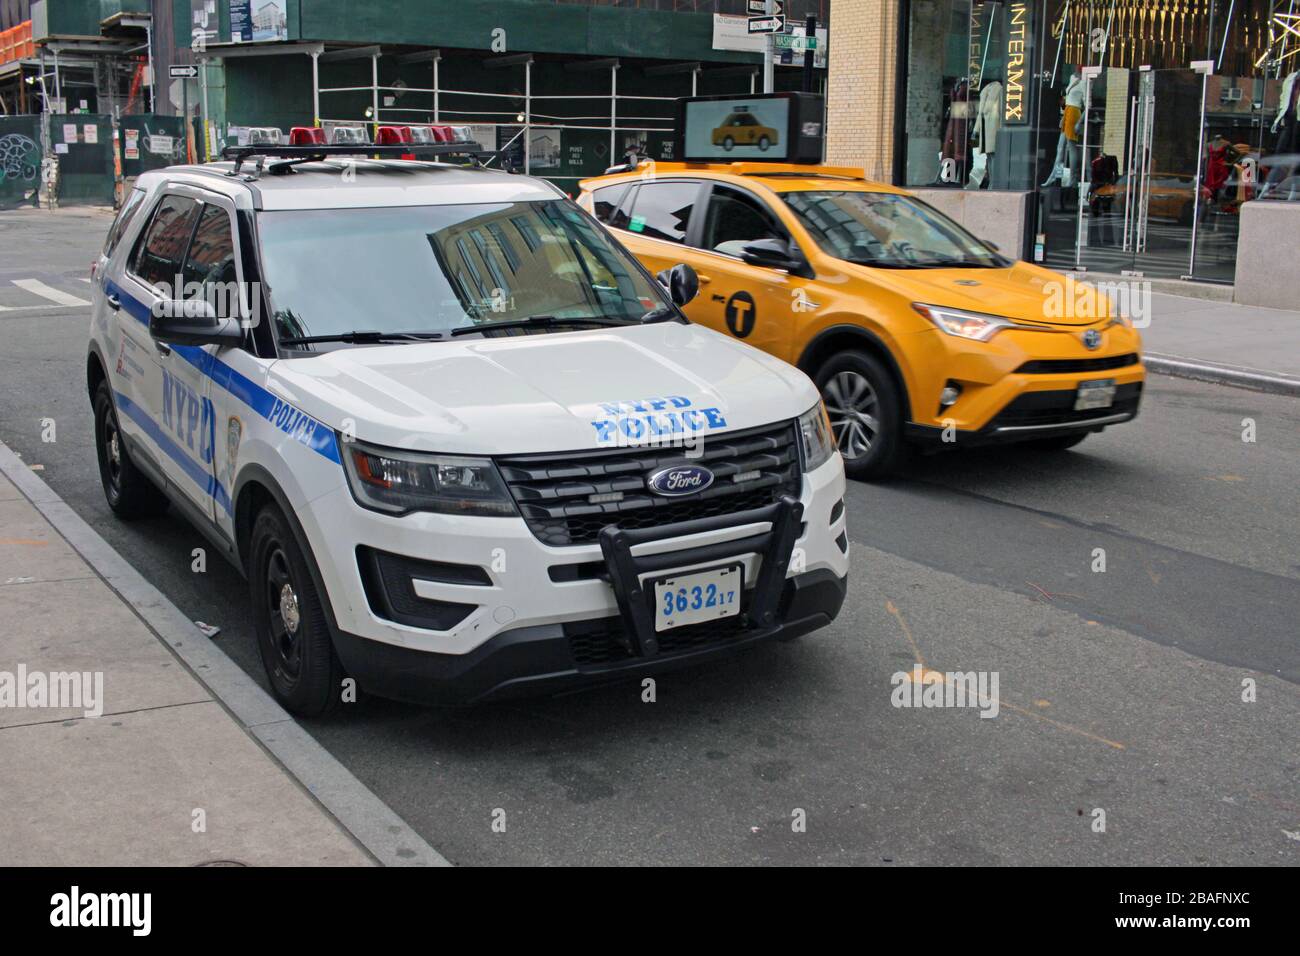 NYPD vehicle and New York Yellow Cab taxi, Meatpacking District, New York City, USA Stock Photo